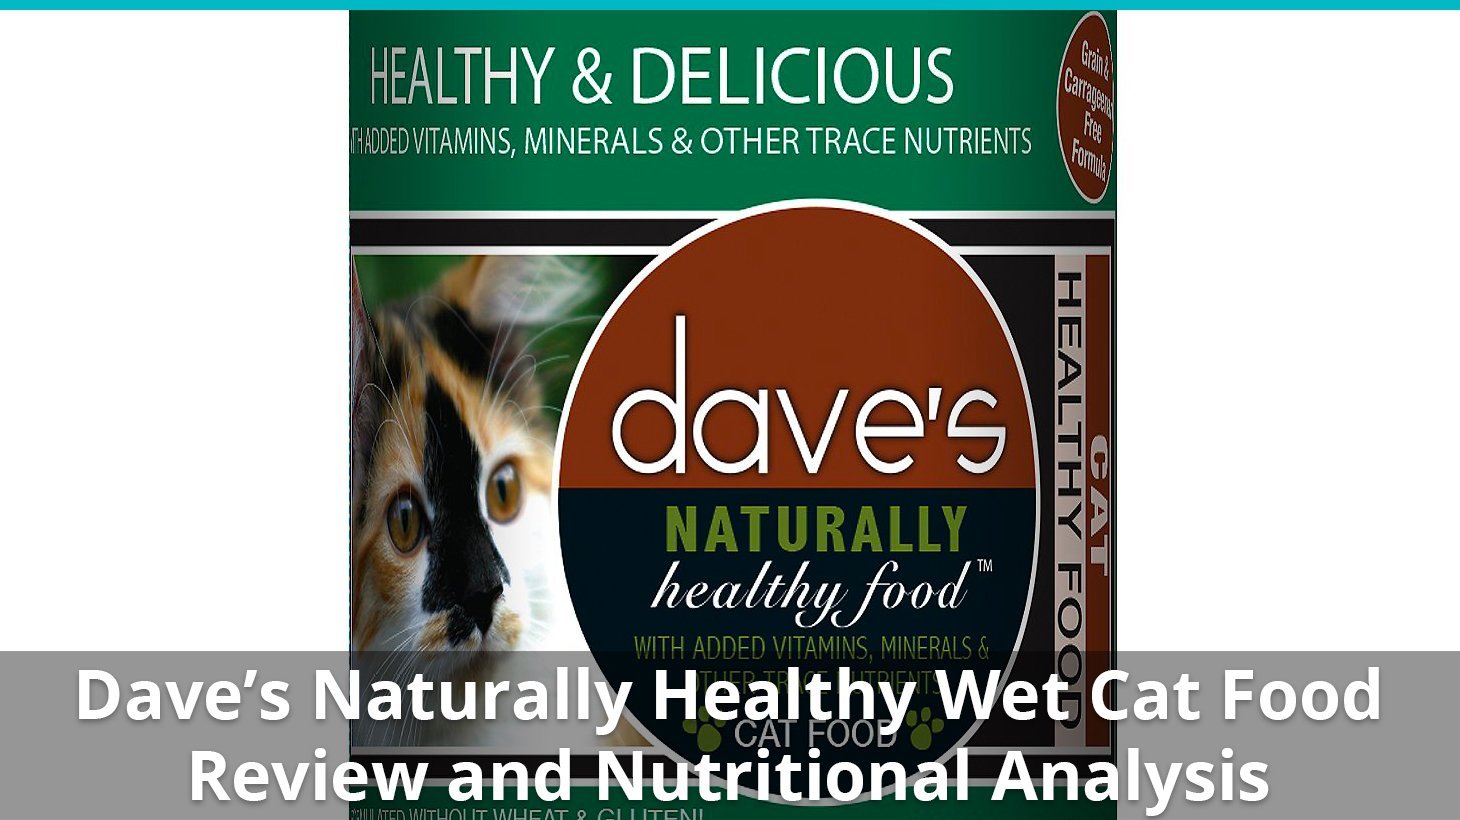 daves pet food naturally healthy wet